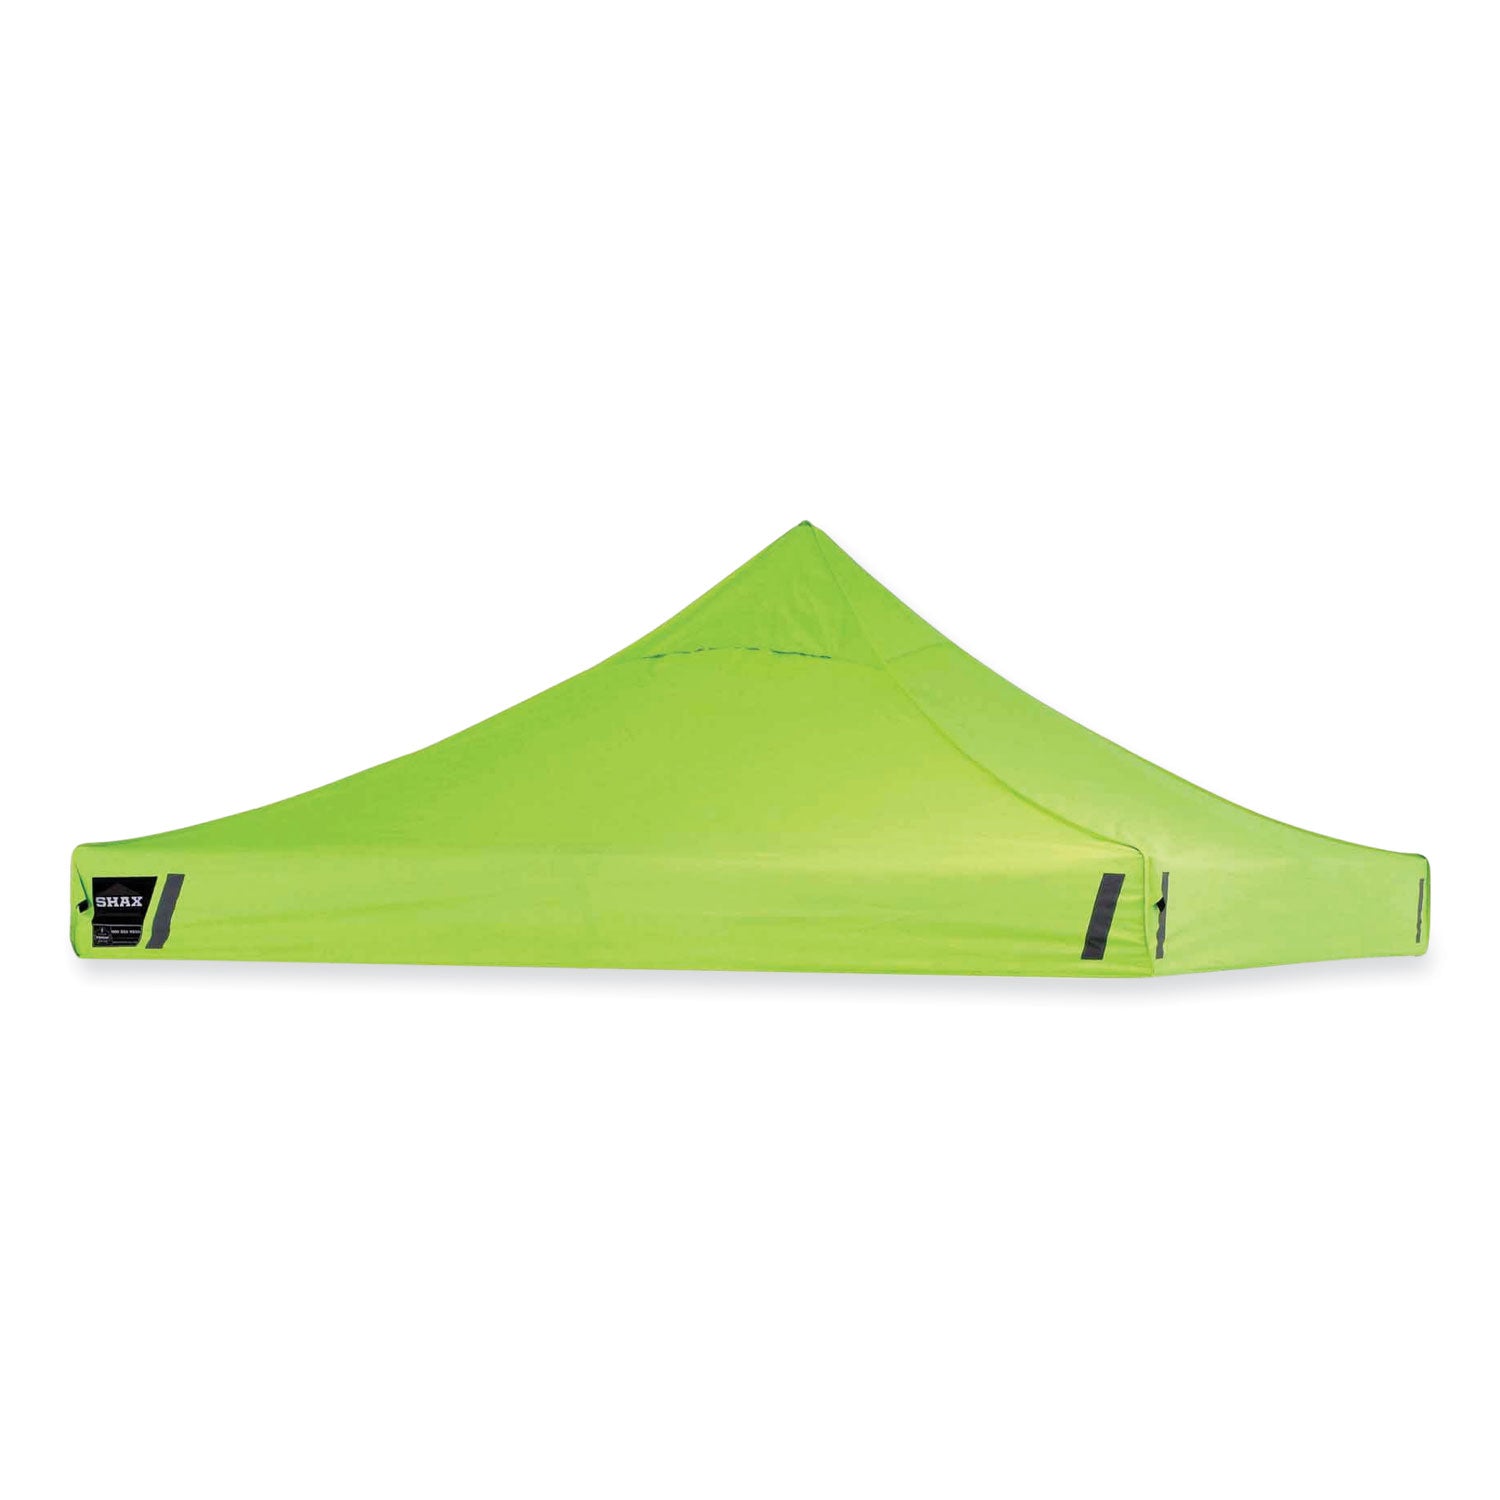 shax-6000c-replacement-pop-up-tent-canopy-for-6000-10-ft-x-10-ft-polyester-lime-ships-in-1-3-business-days_ego12901 - 1